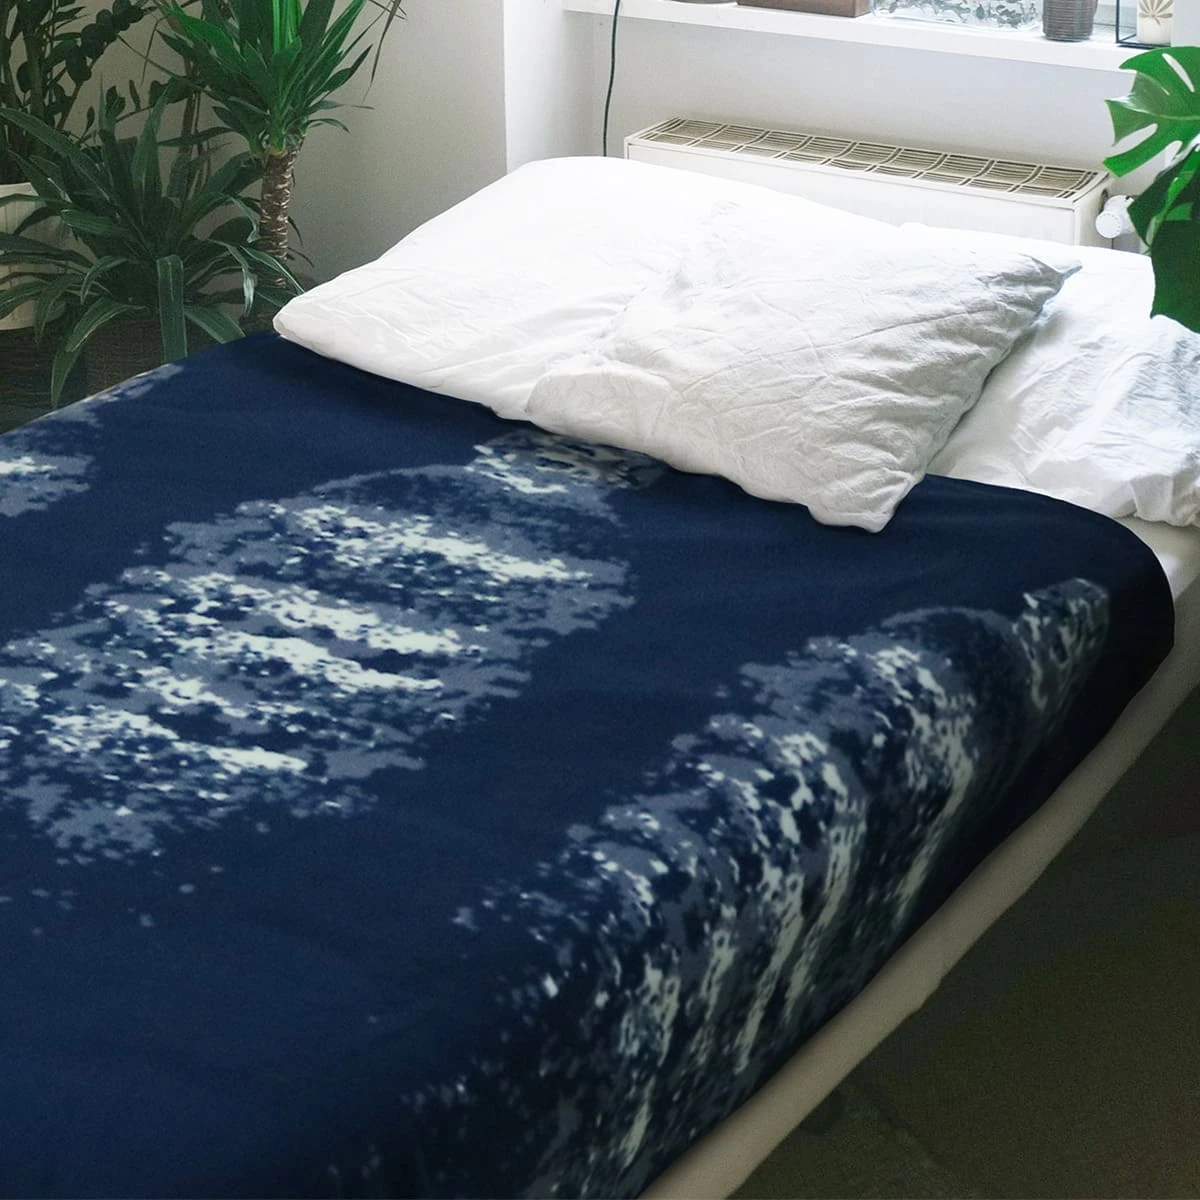 100% Recycled Polyester Bottles Printed Fleece Blanket - I Love Recycling (Navy)